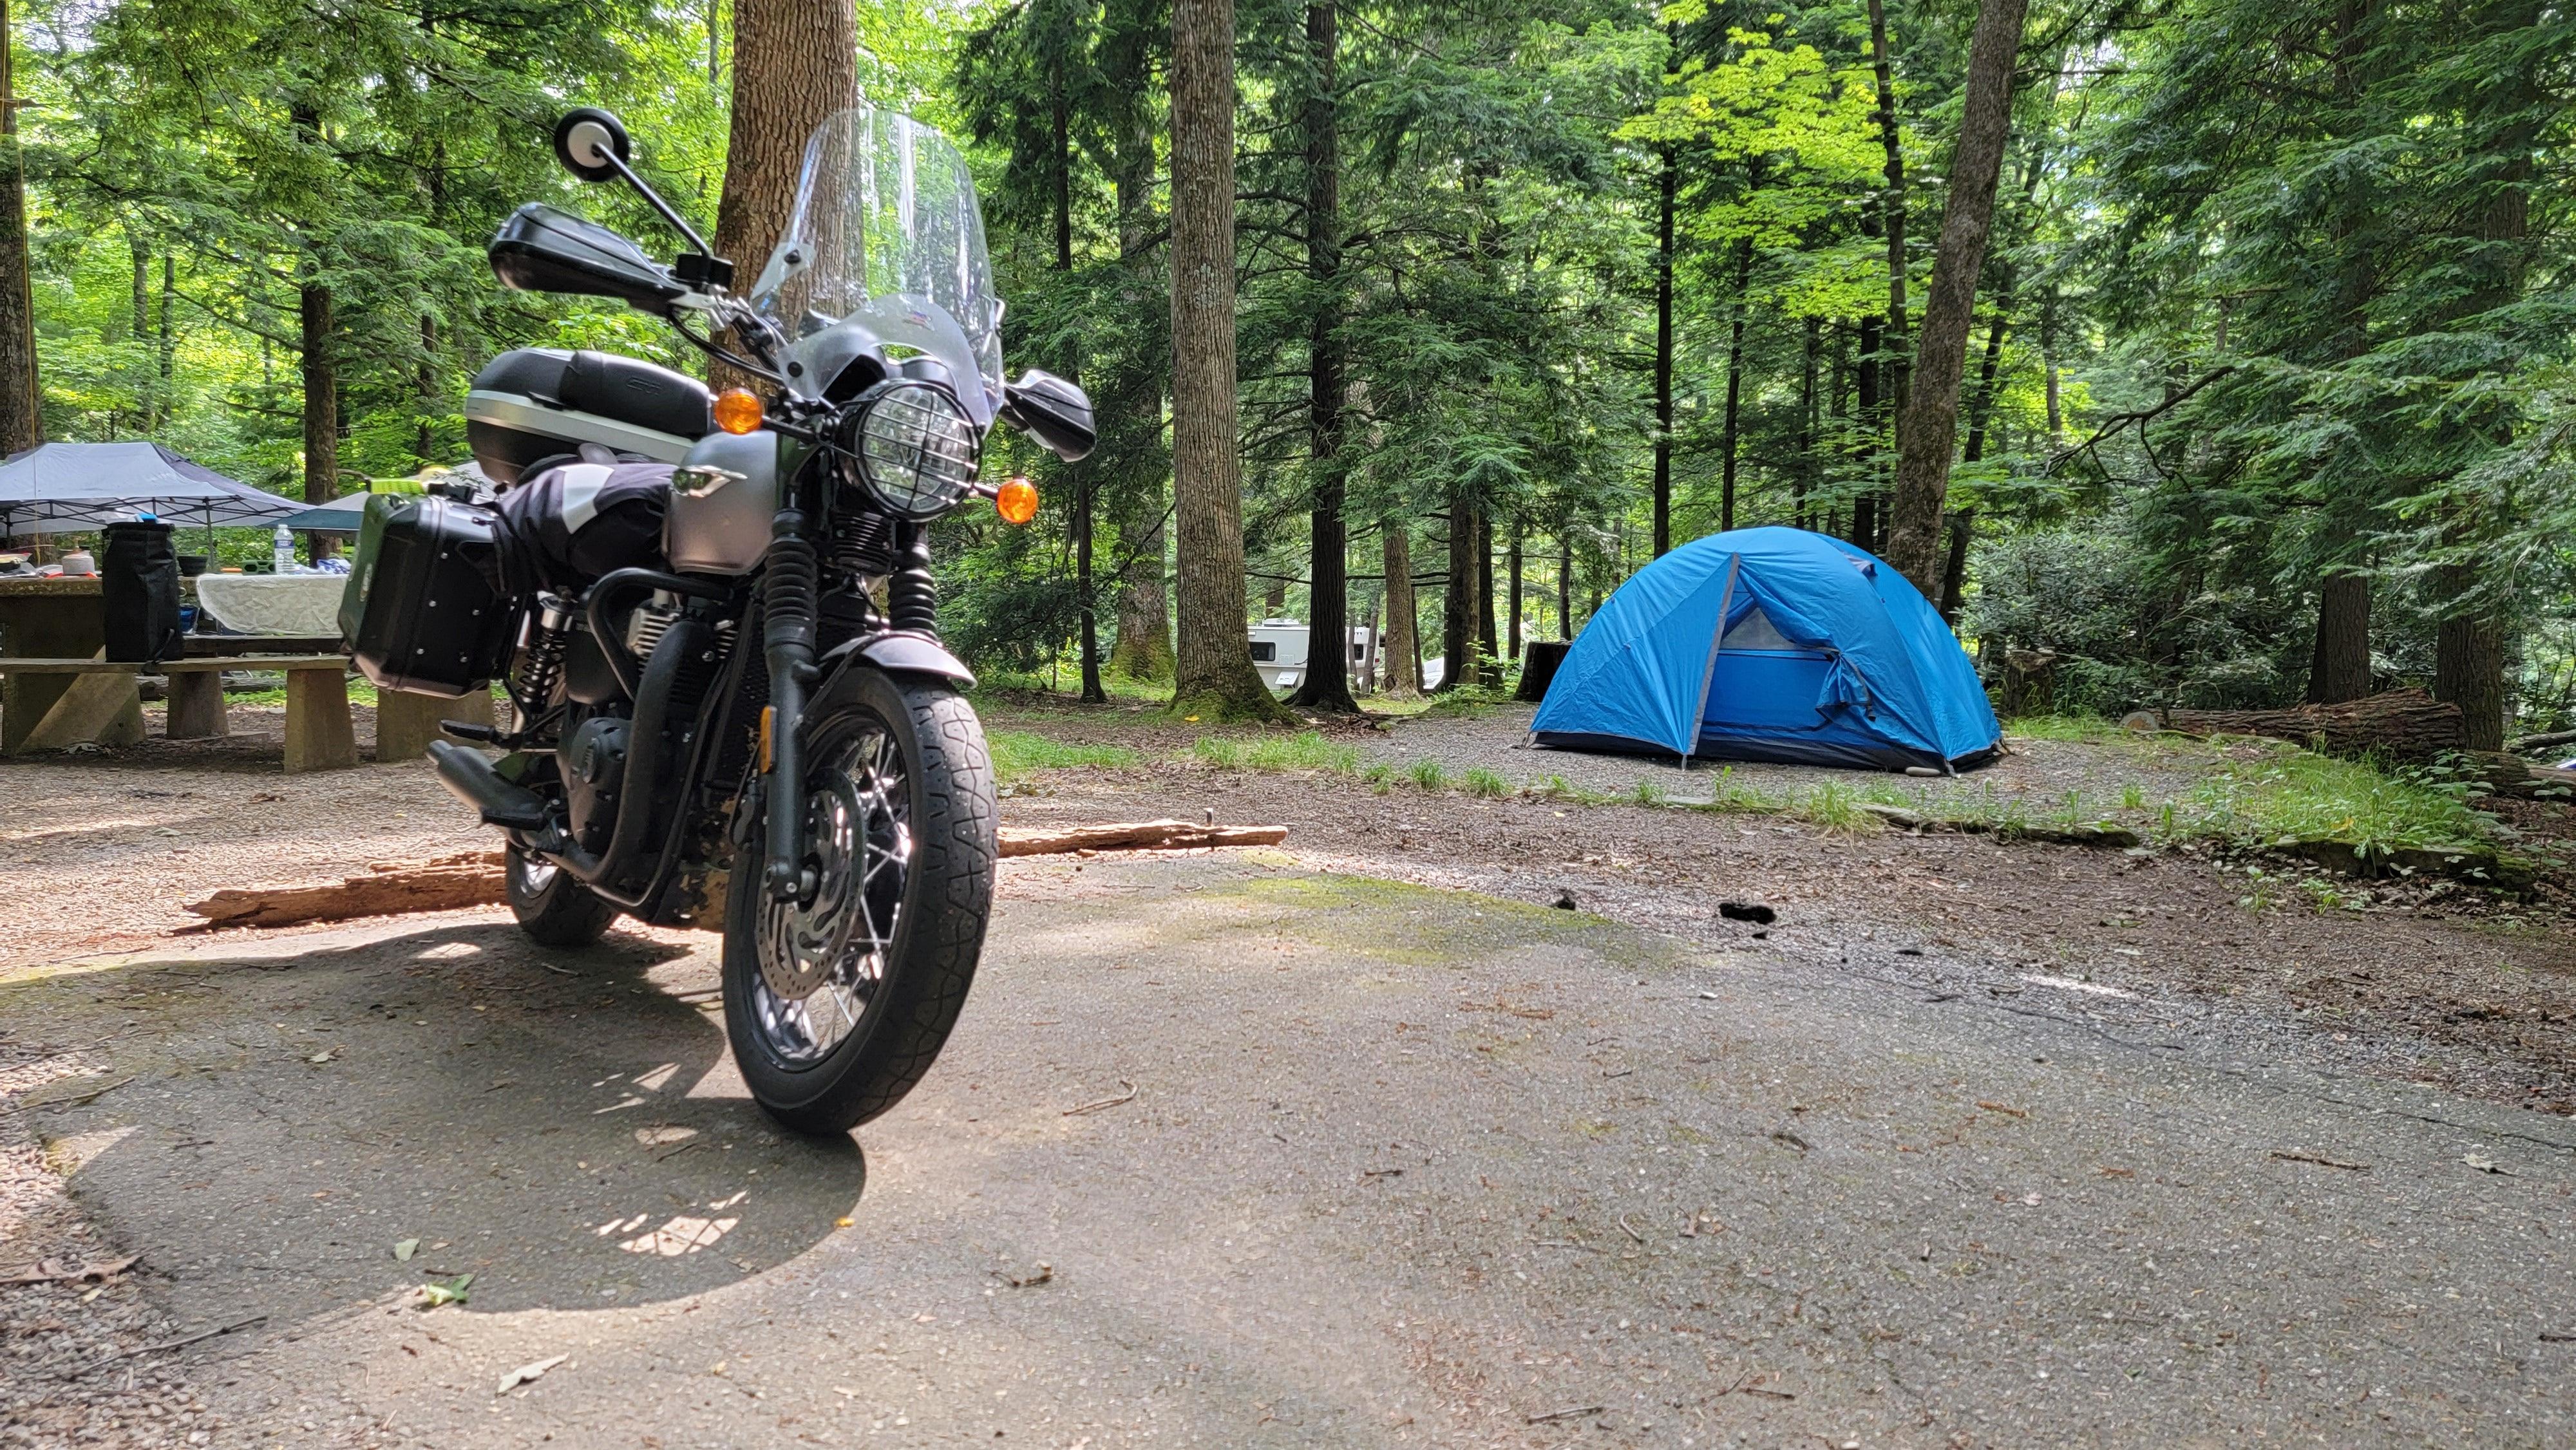 The Nerds' Official Guide to Motorcycle Camping